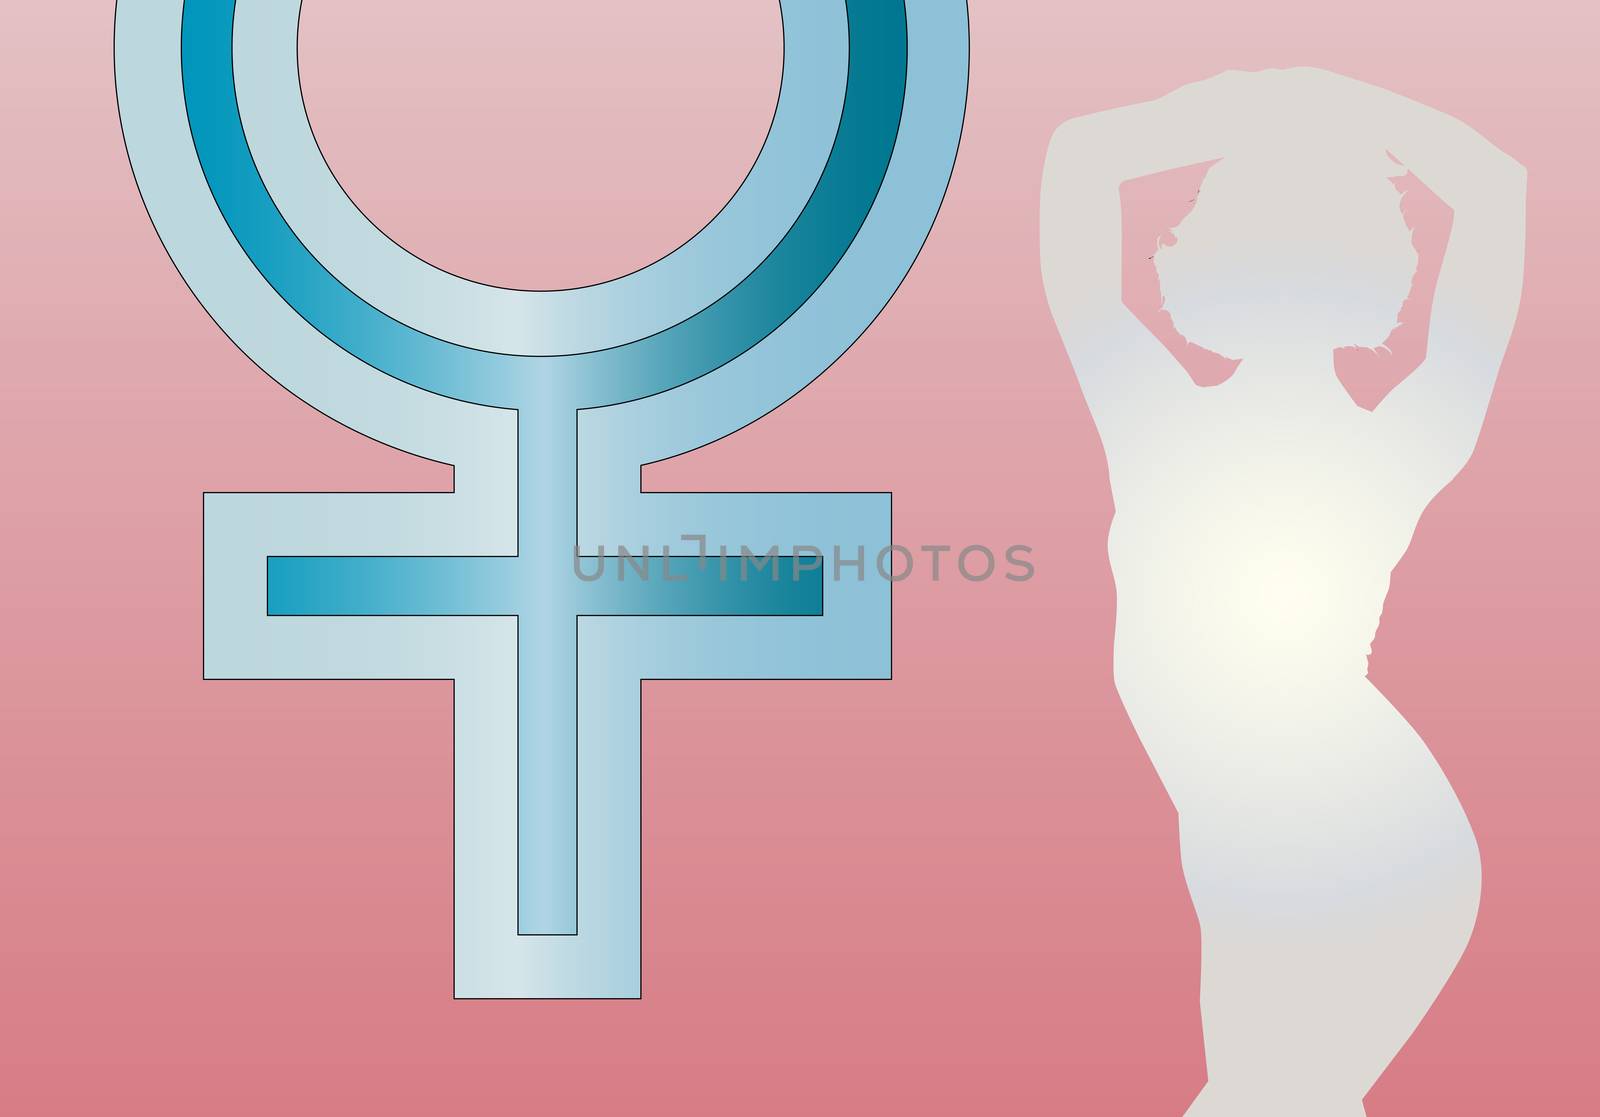 The astrological signs Venus the Goddess of love.